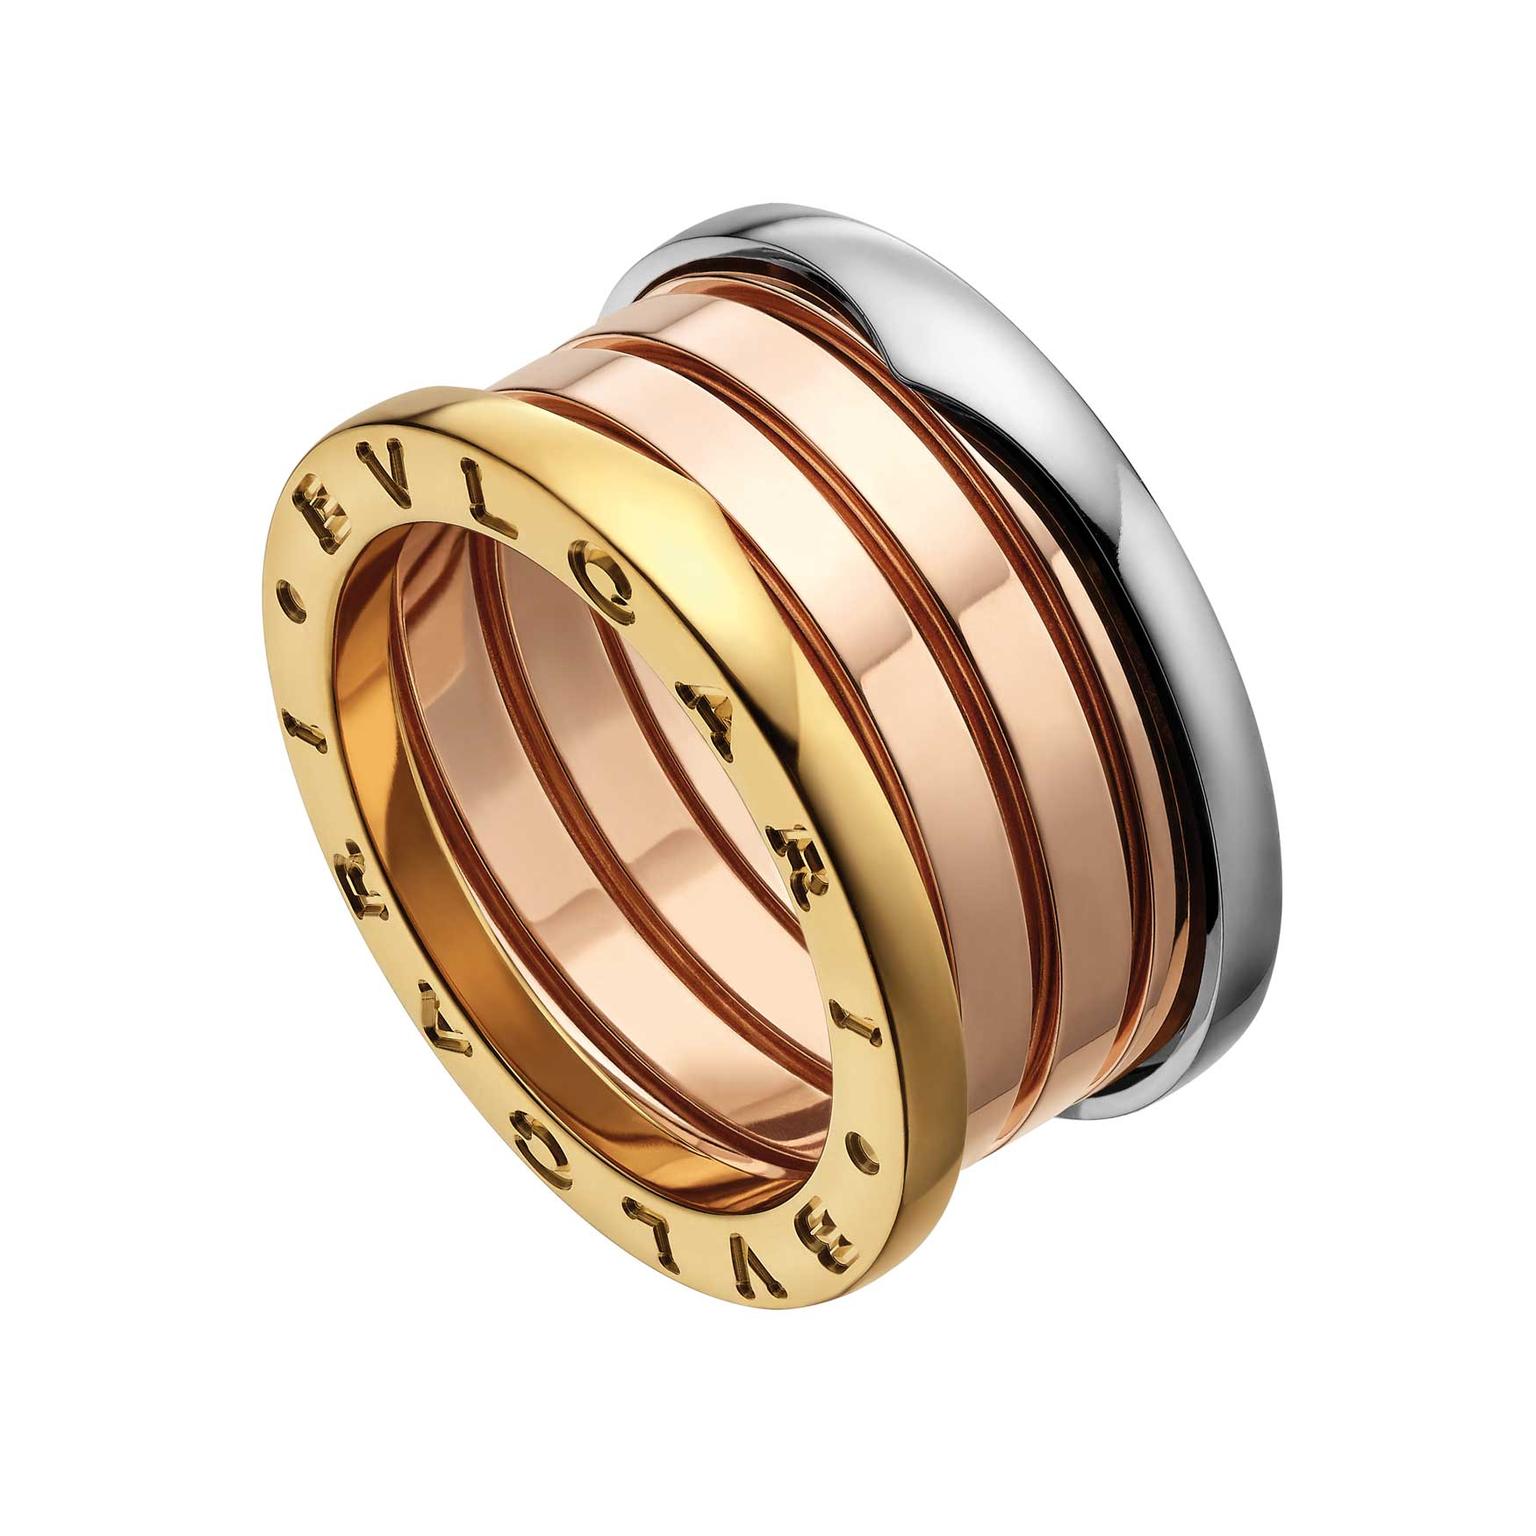 how much for bvlgari ring